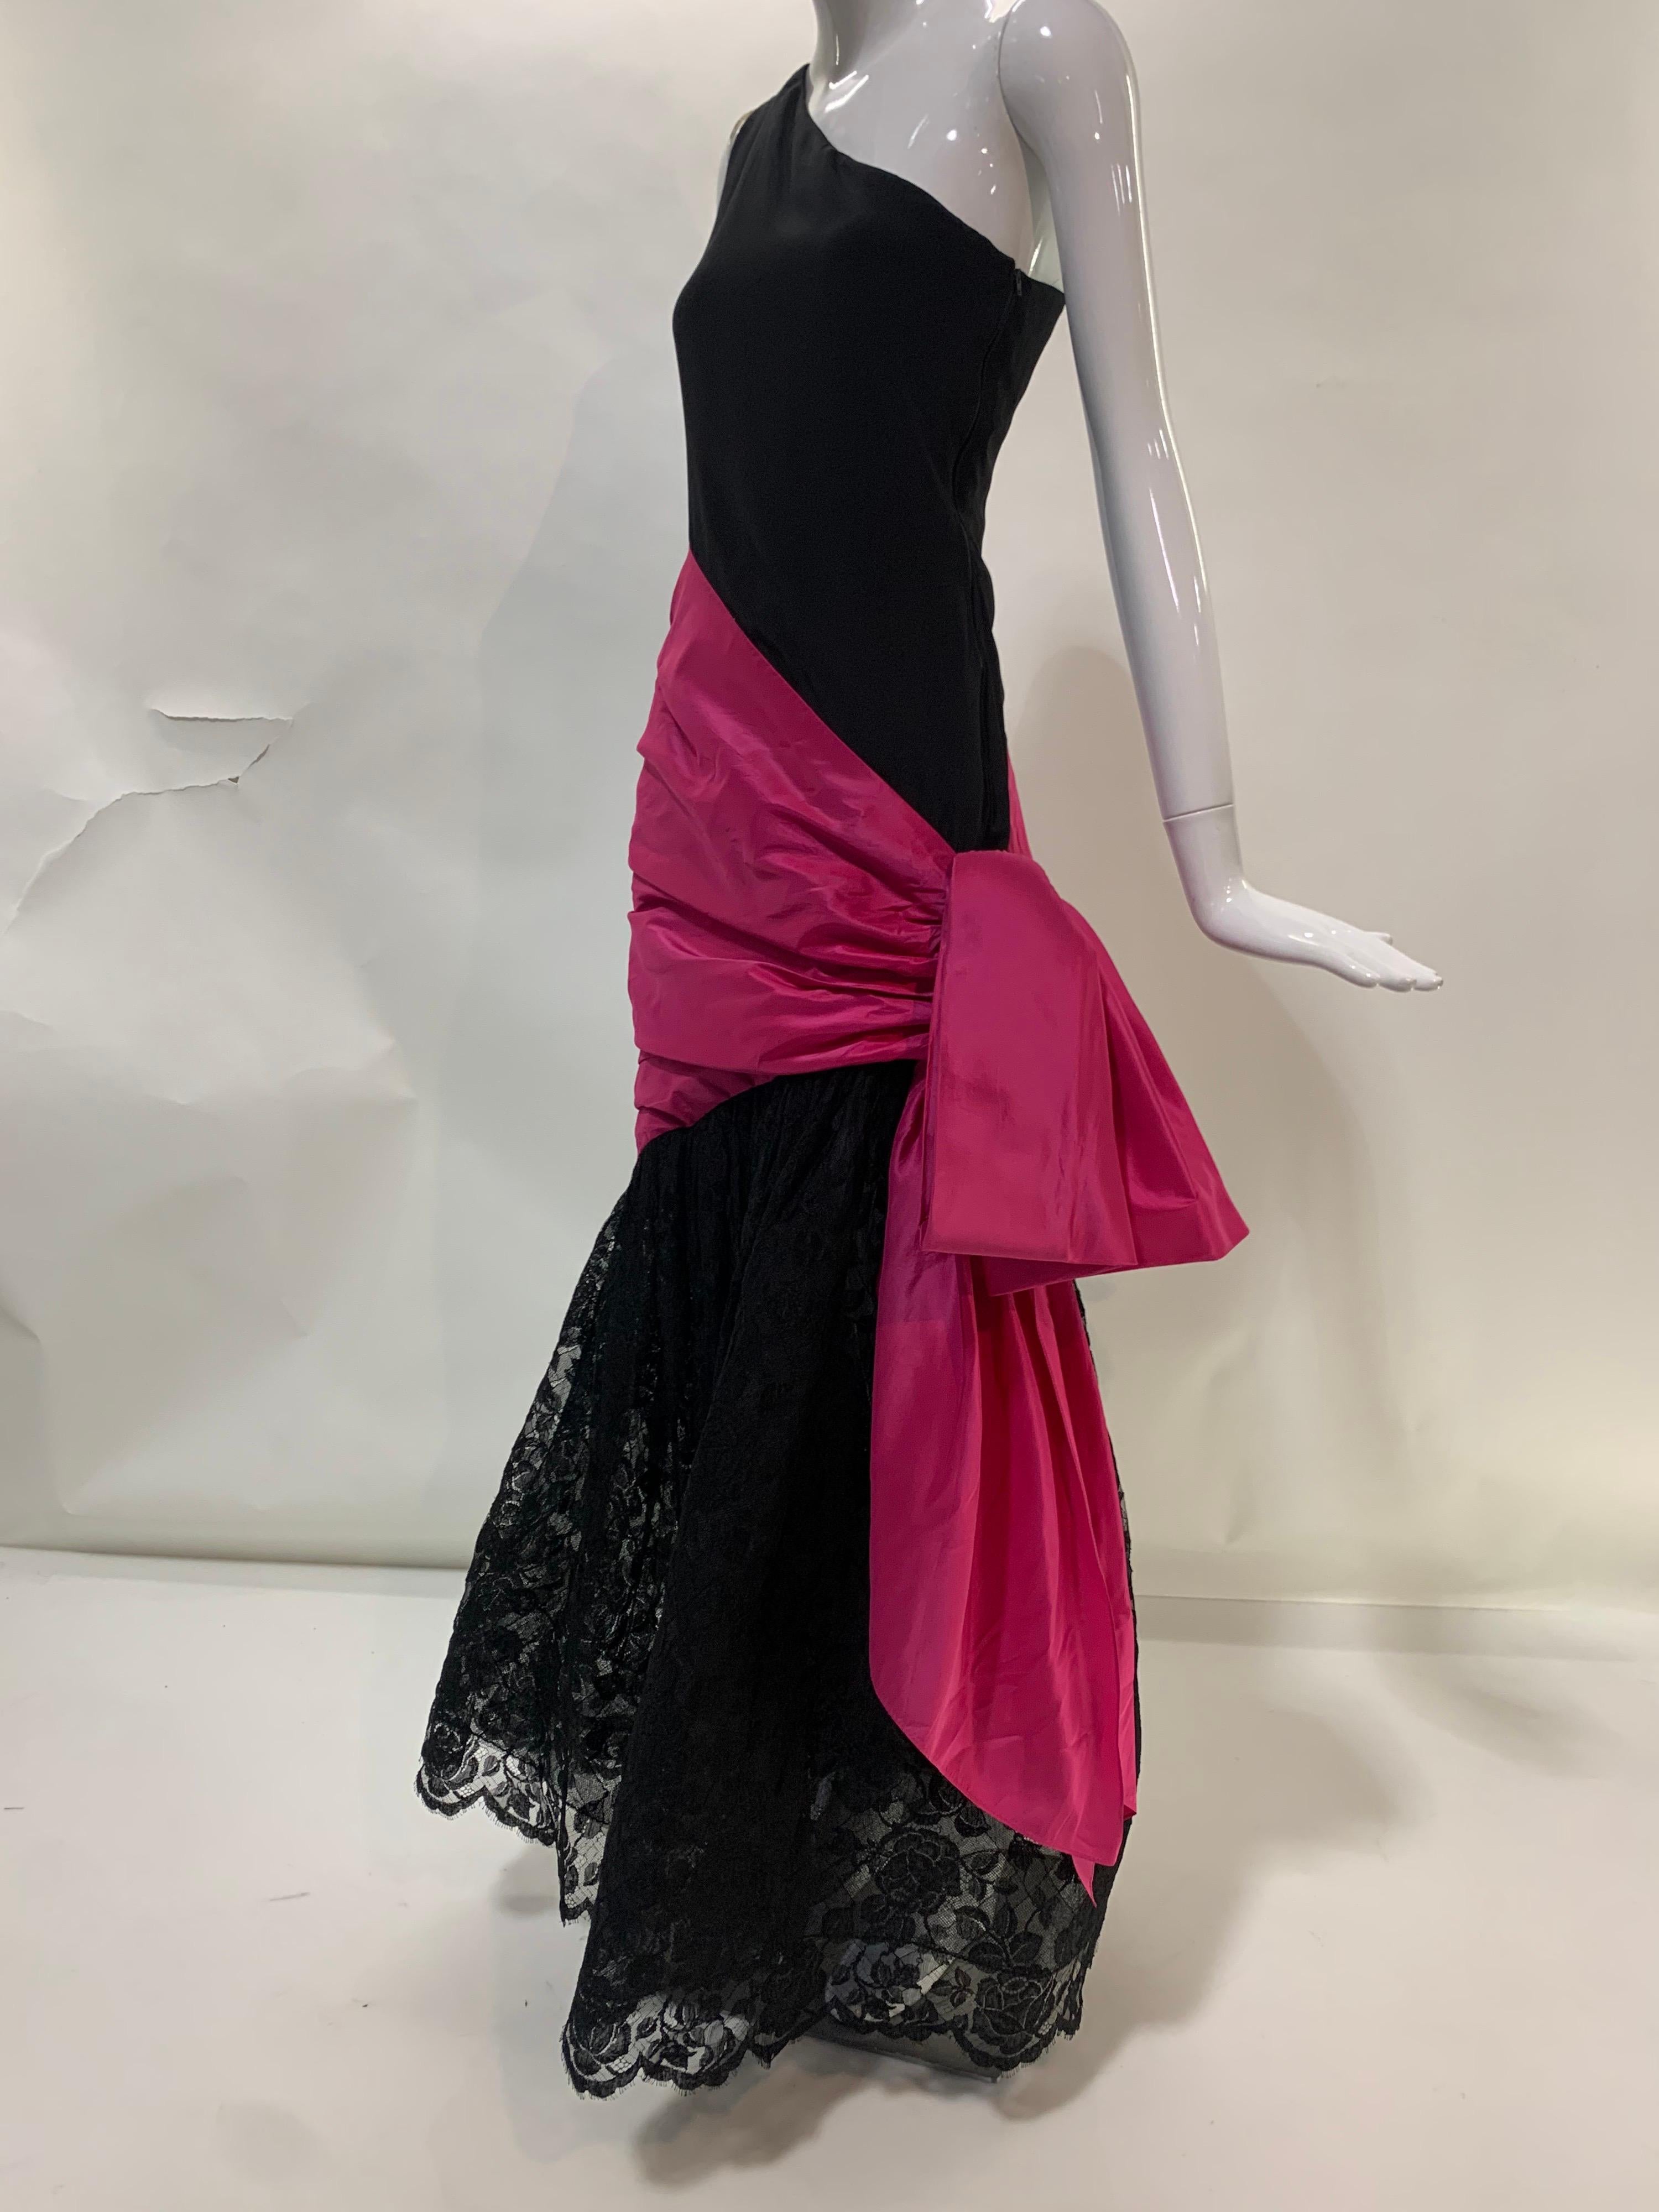 1980 Bill Blass Black Silk Crepe One-Shoulder Gown w/ Lace Skirt and Fuchsia Bow For Sale 13